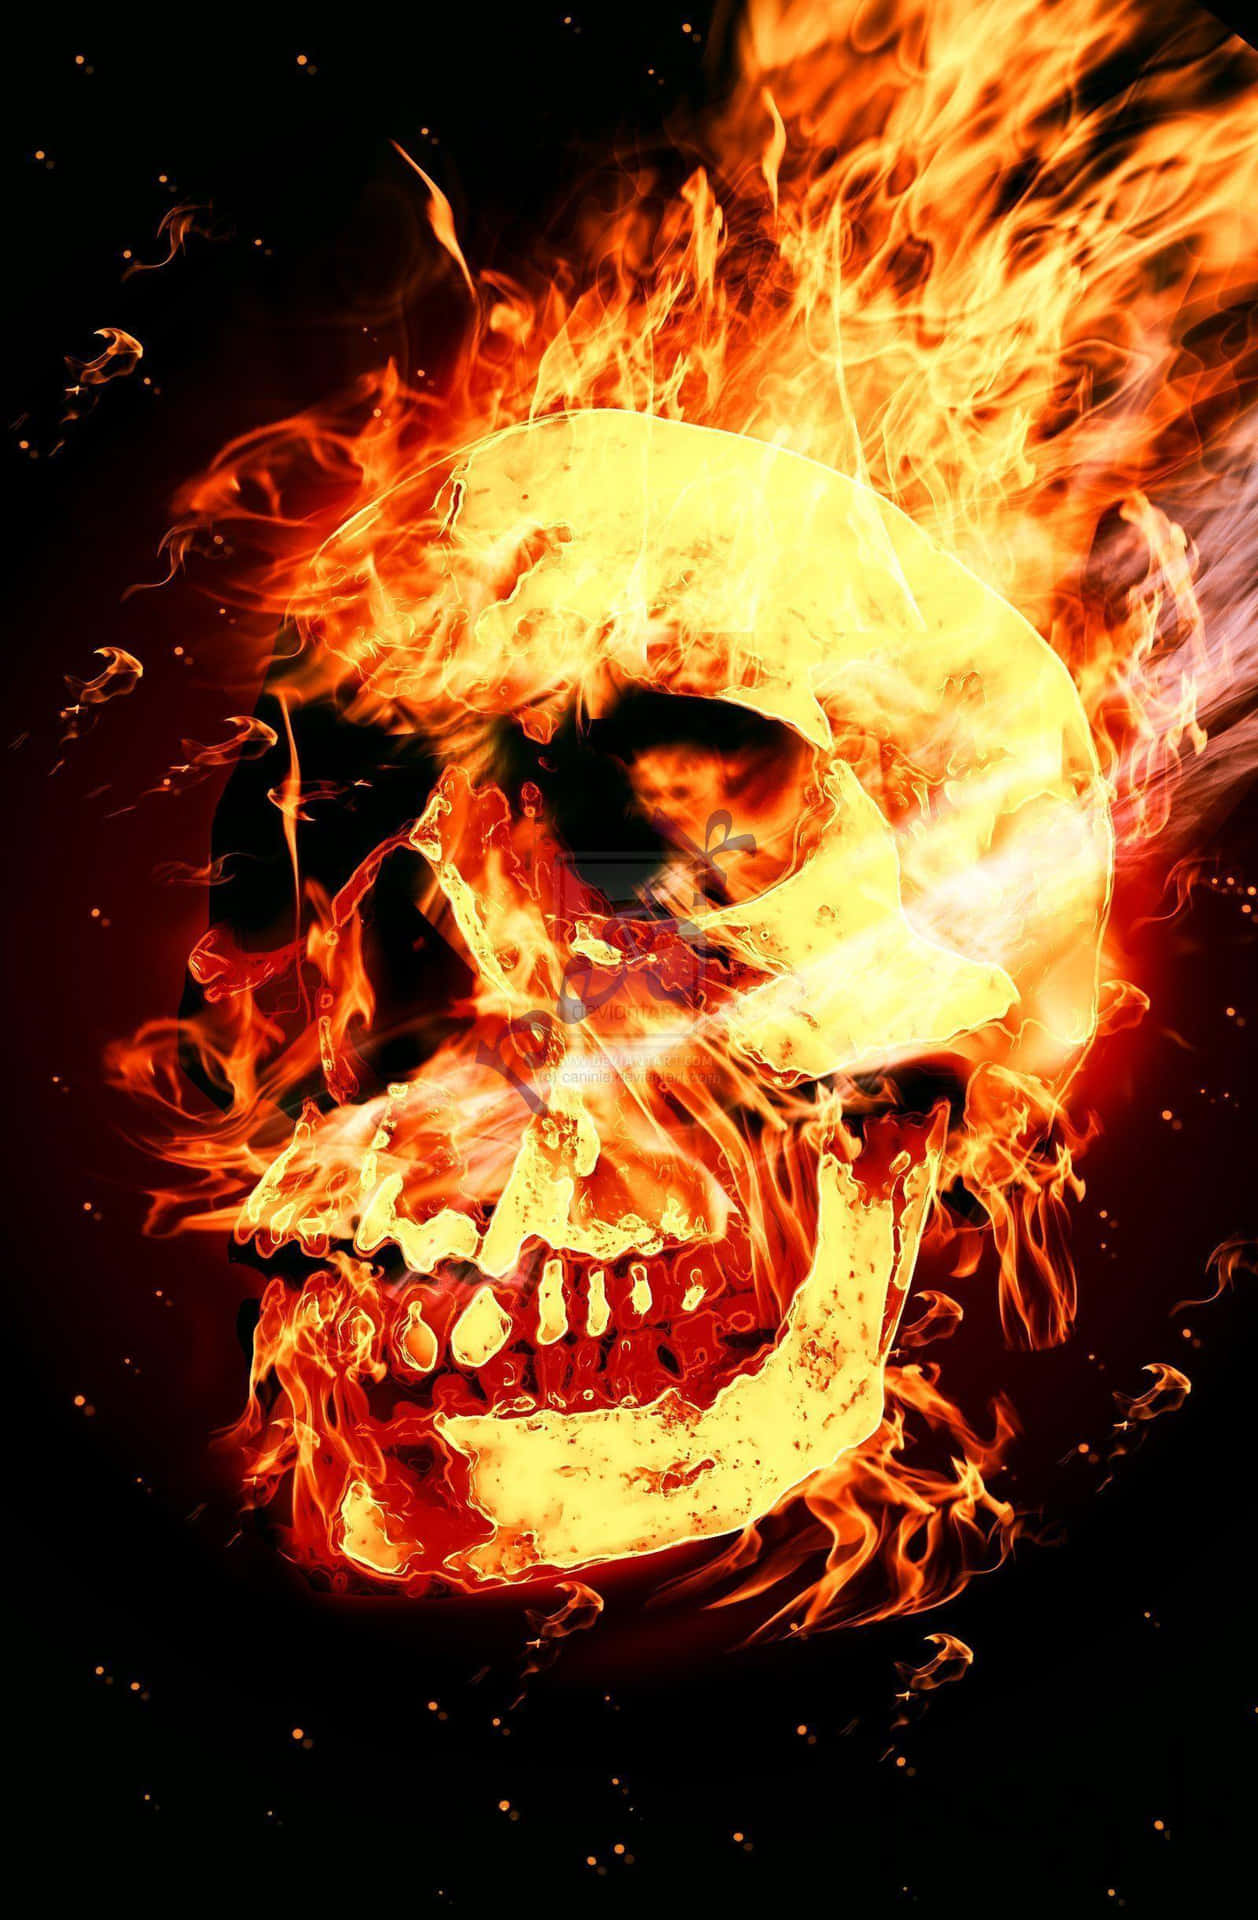 Intriguing Red Flame Skull Wallpaper